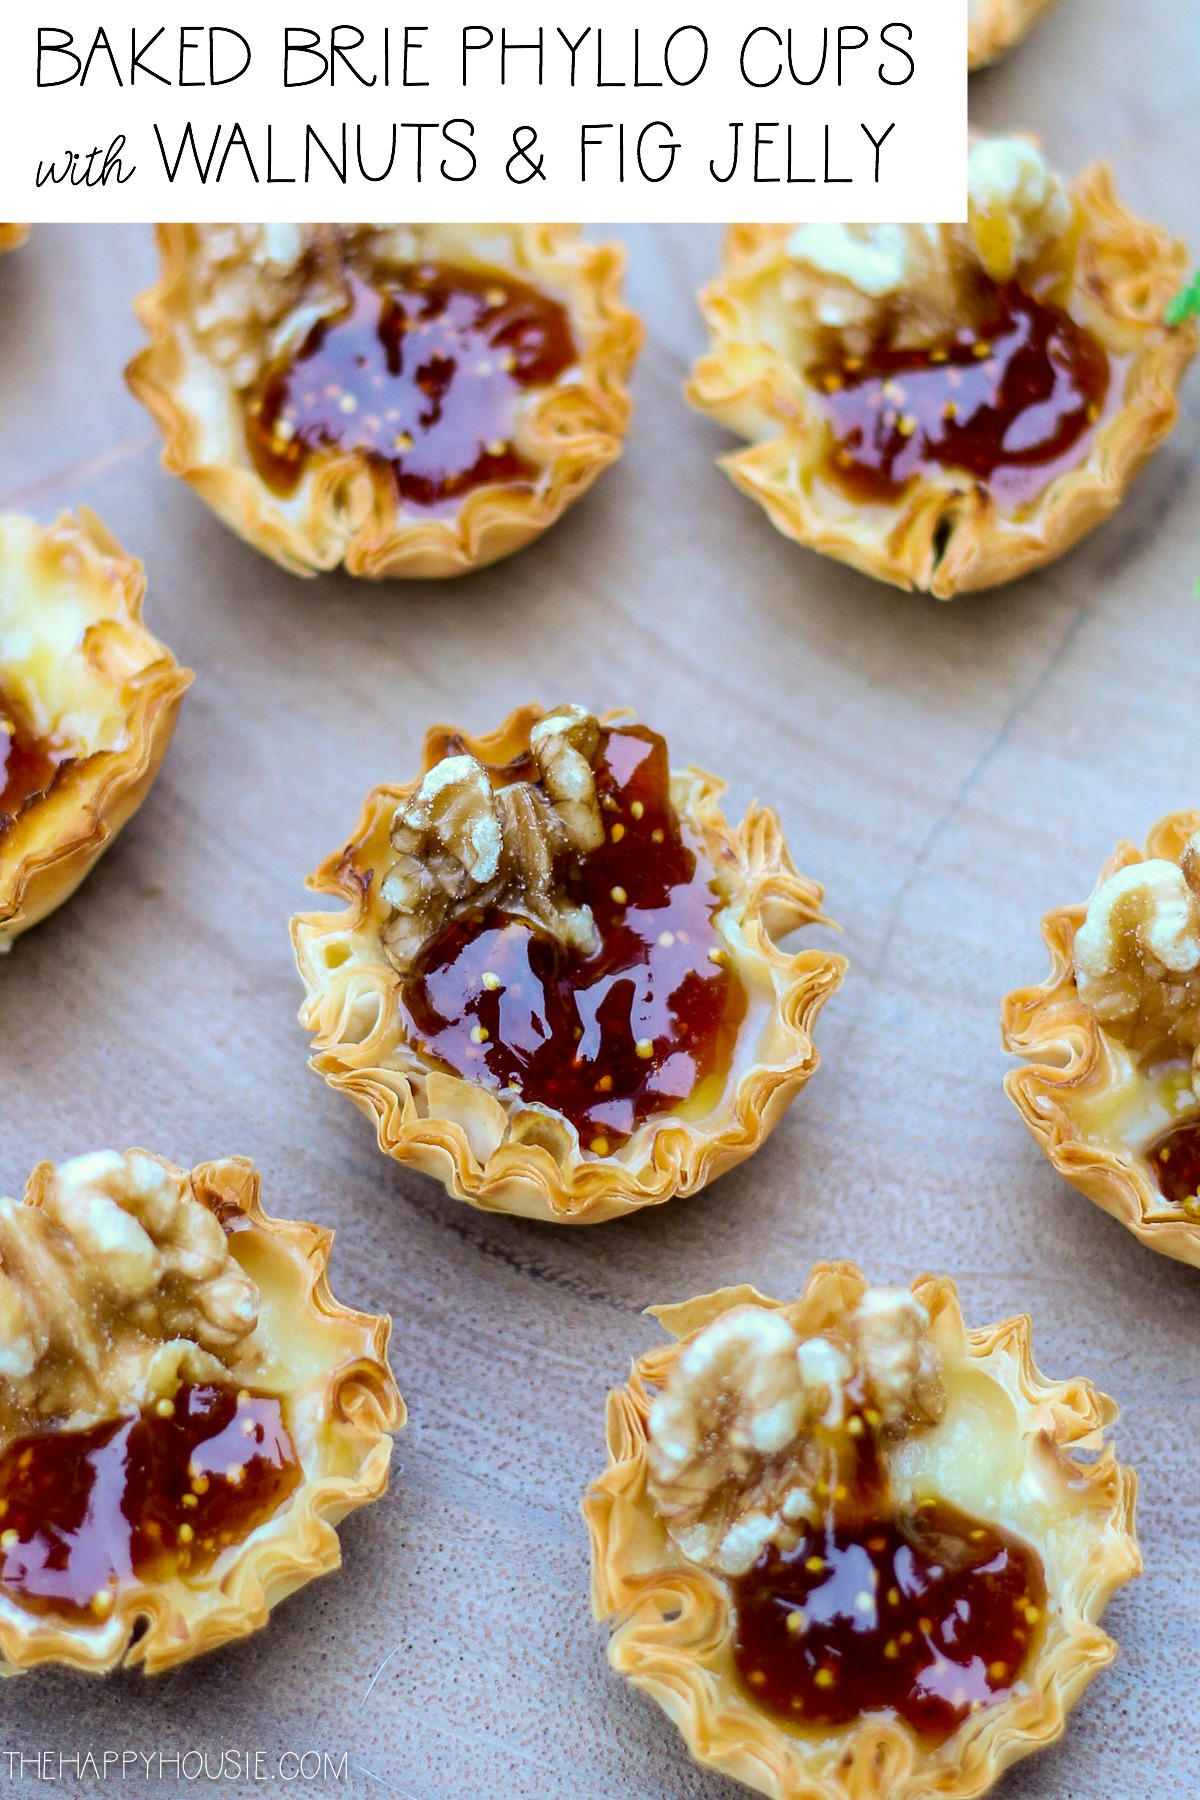 Baked brie phyllo cups graphic.